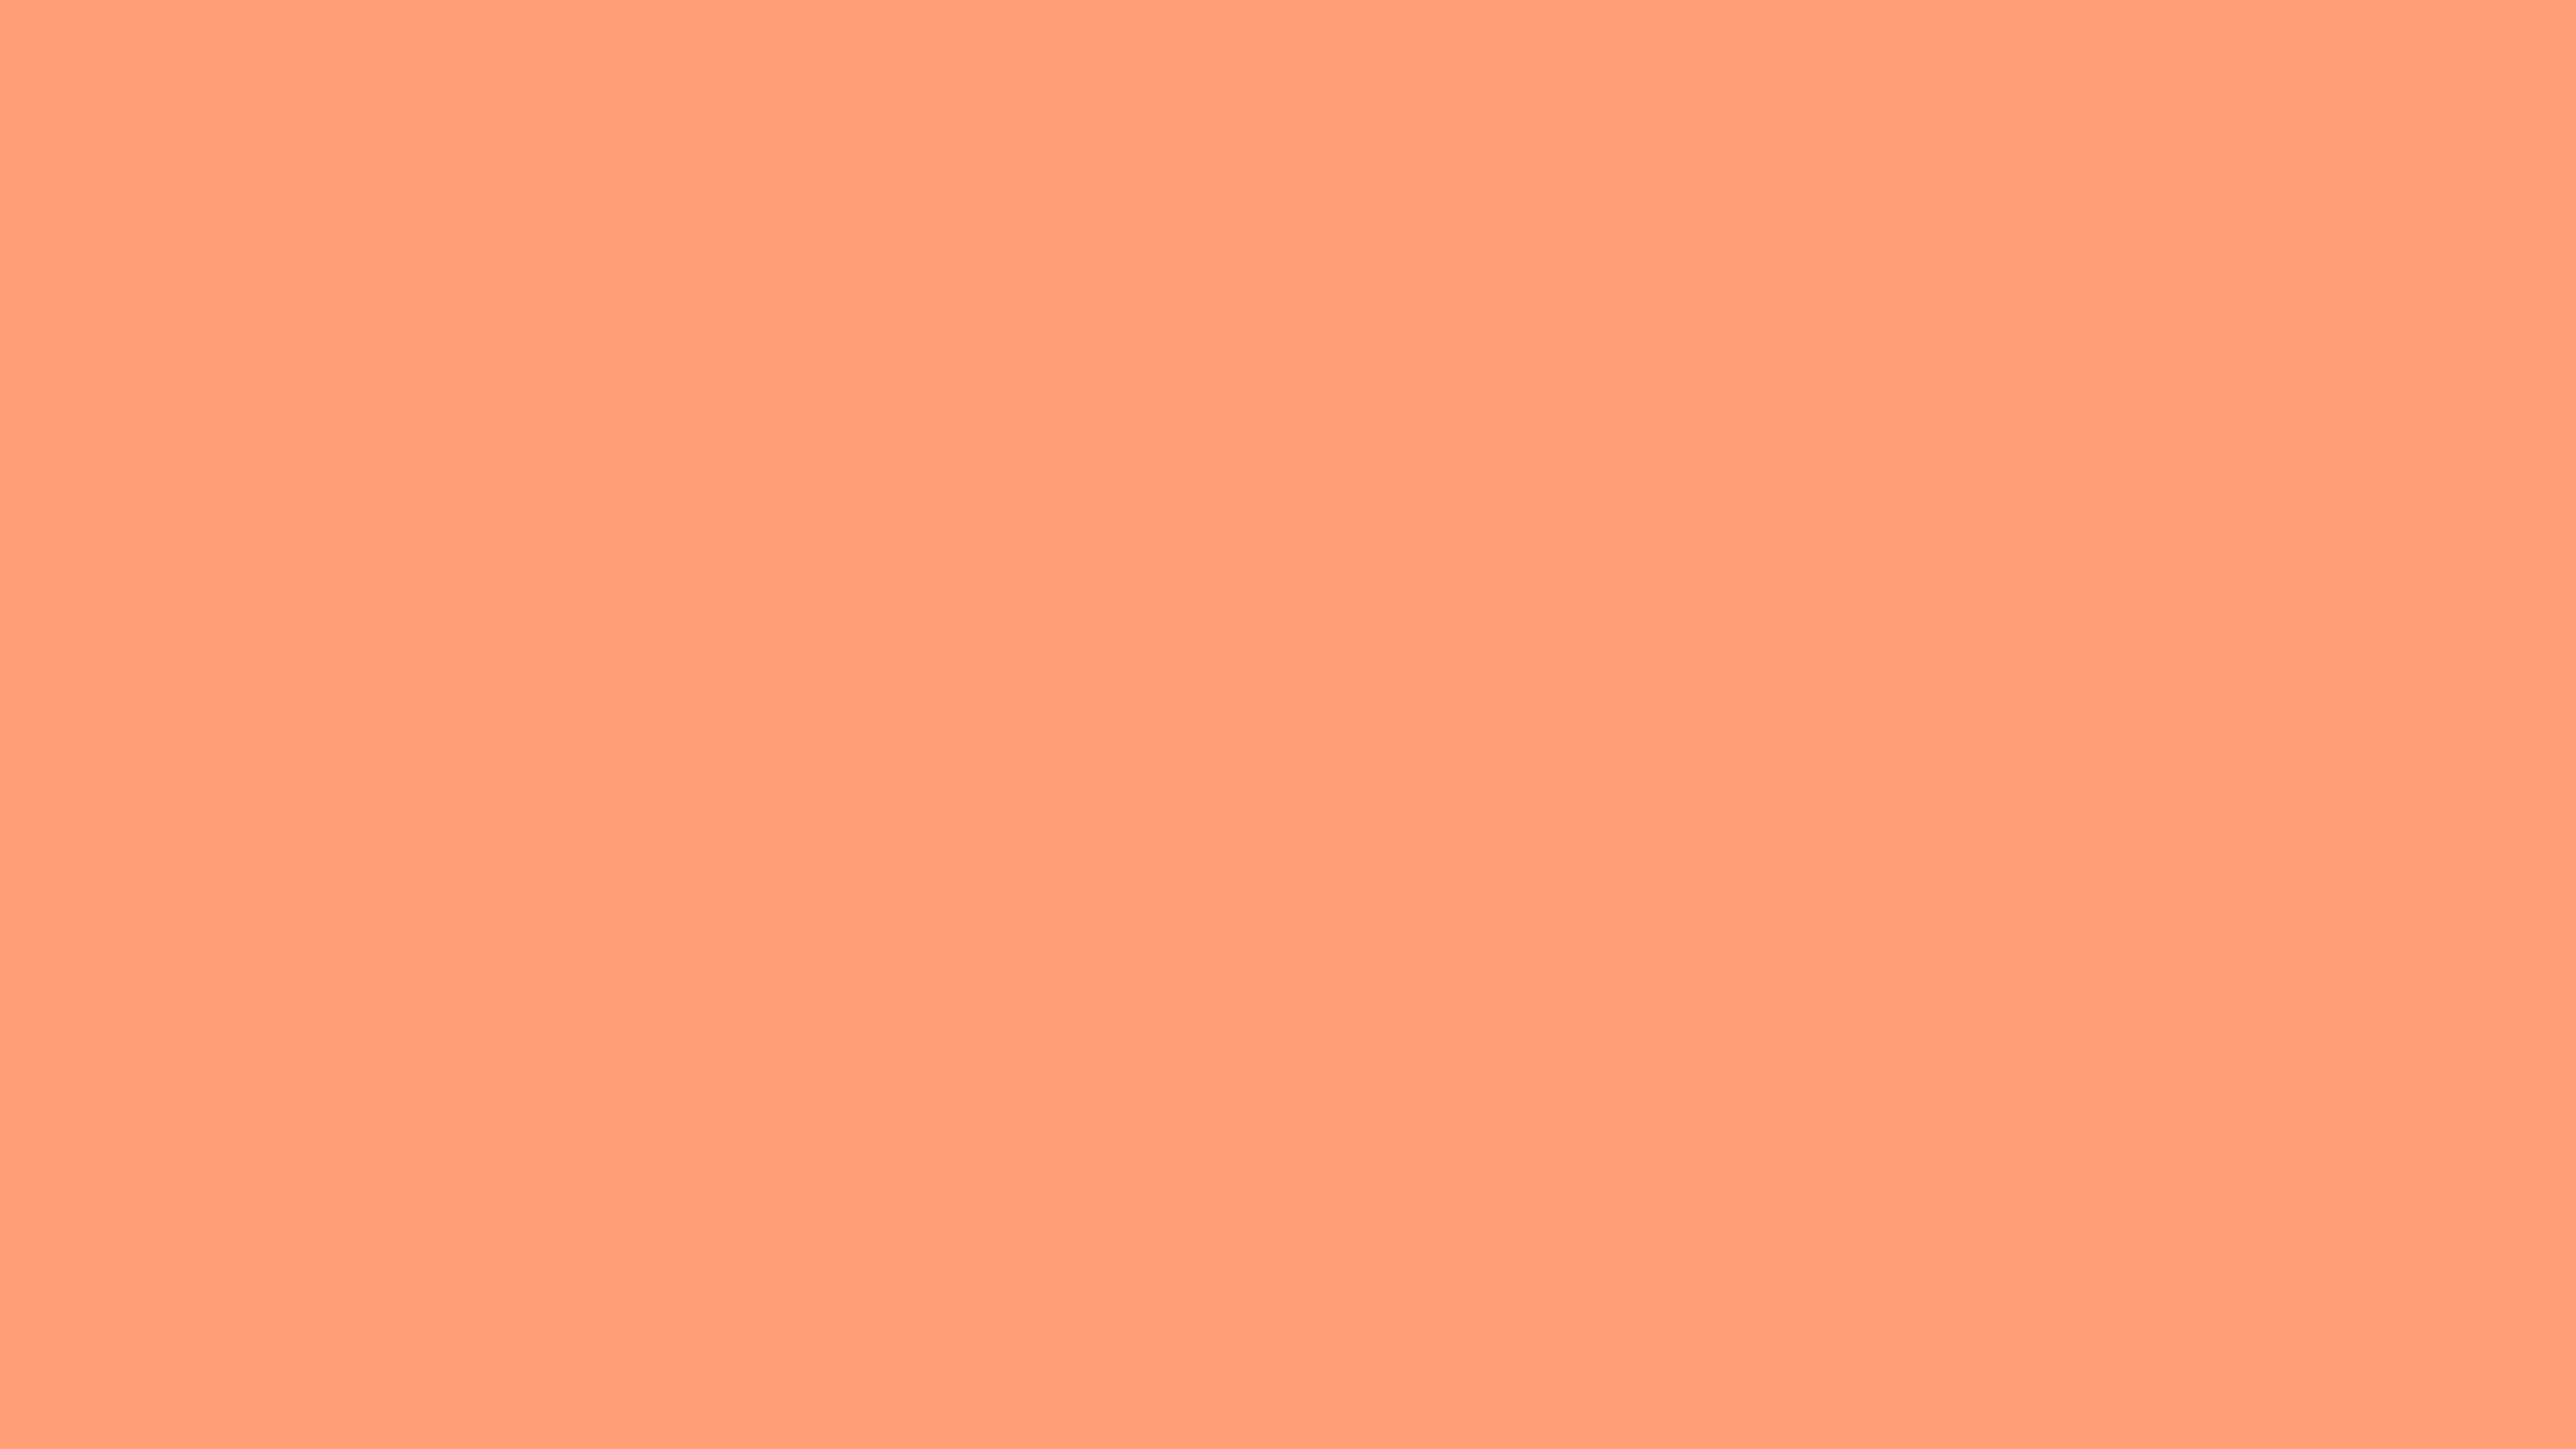 3840x2160 Light Salmon Solid Color Background